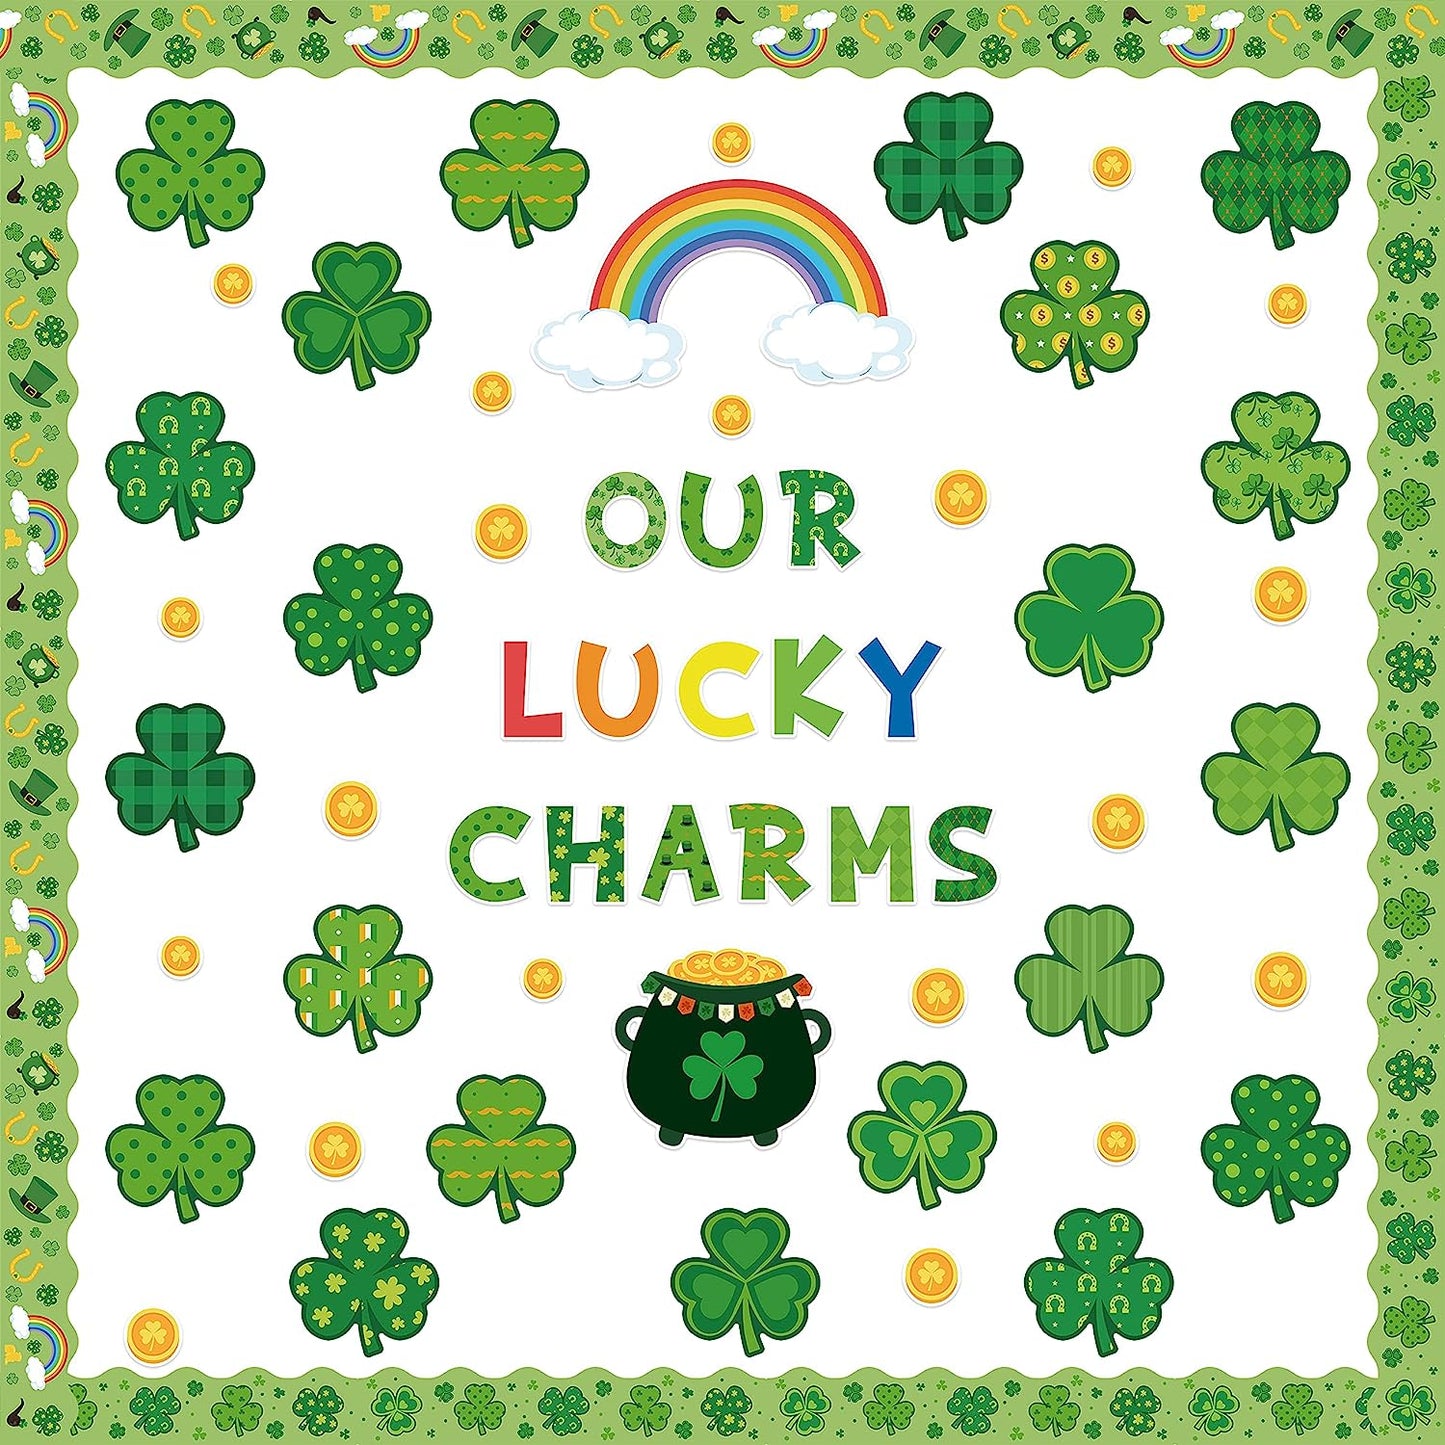 121Pcs St.Patrick Day Shamrock Bulletin Board Decoration Cutouts Set Contain Clover, Gold, Rainbow, Stockpot, Border with Characters About Our Lucky Charms Happy St.Patrick and Home Decoration